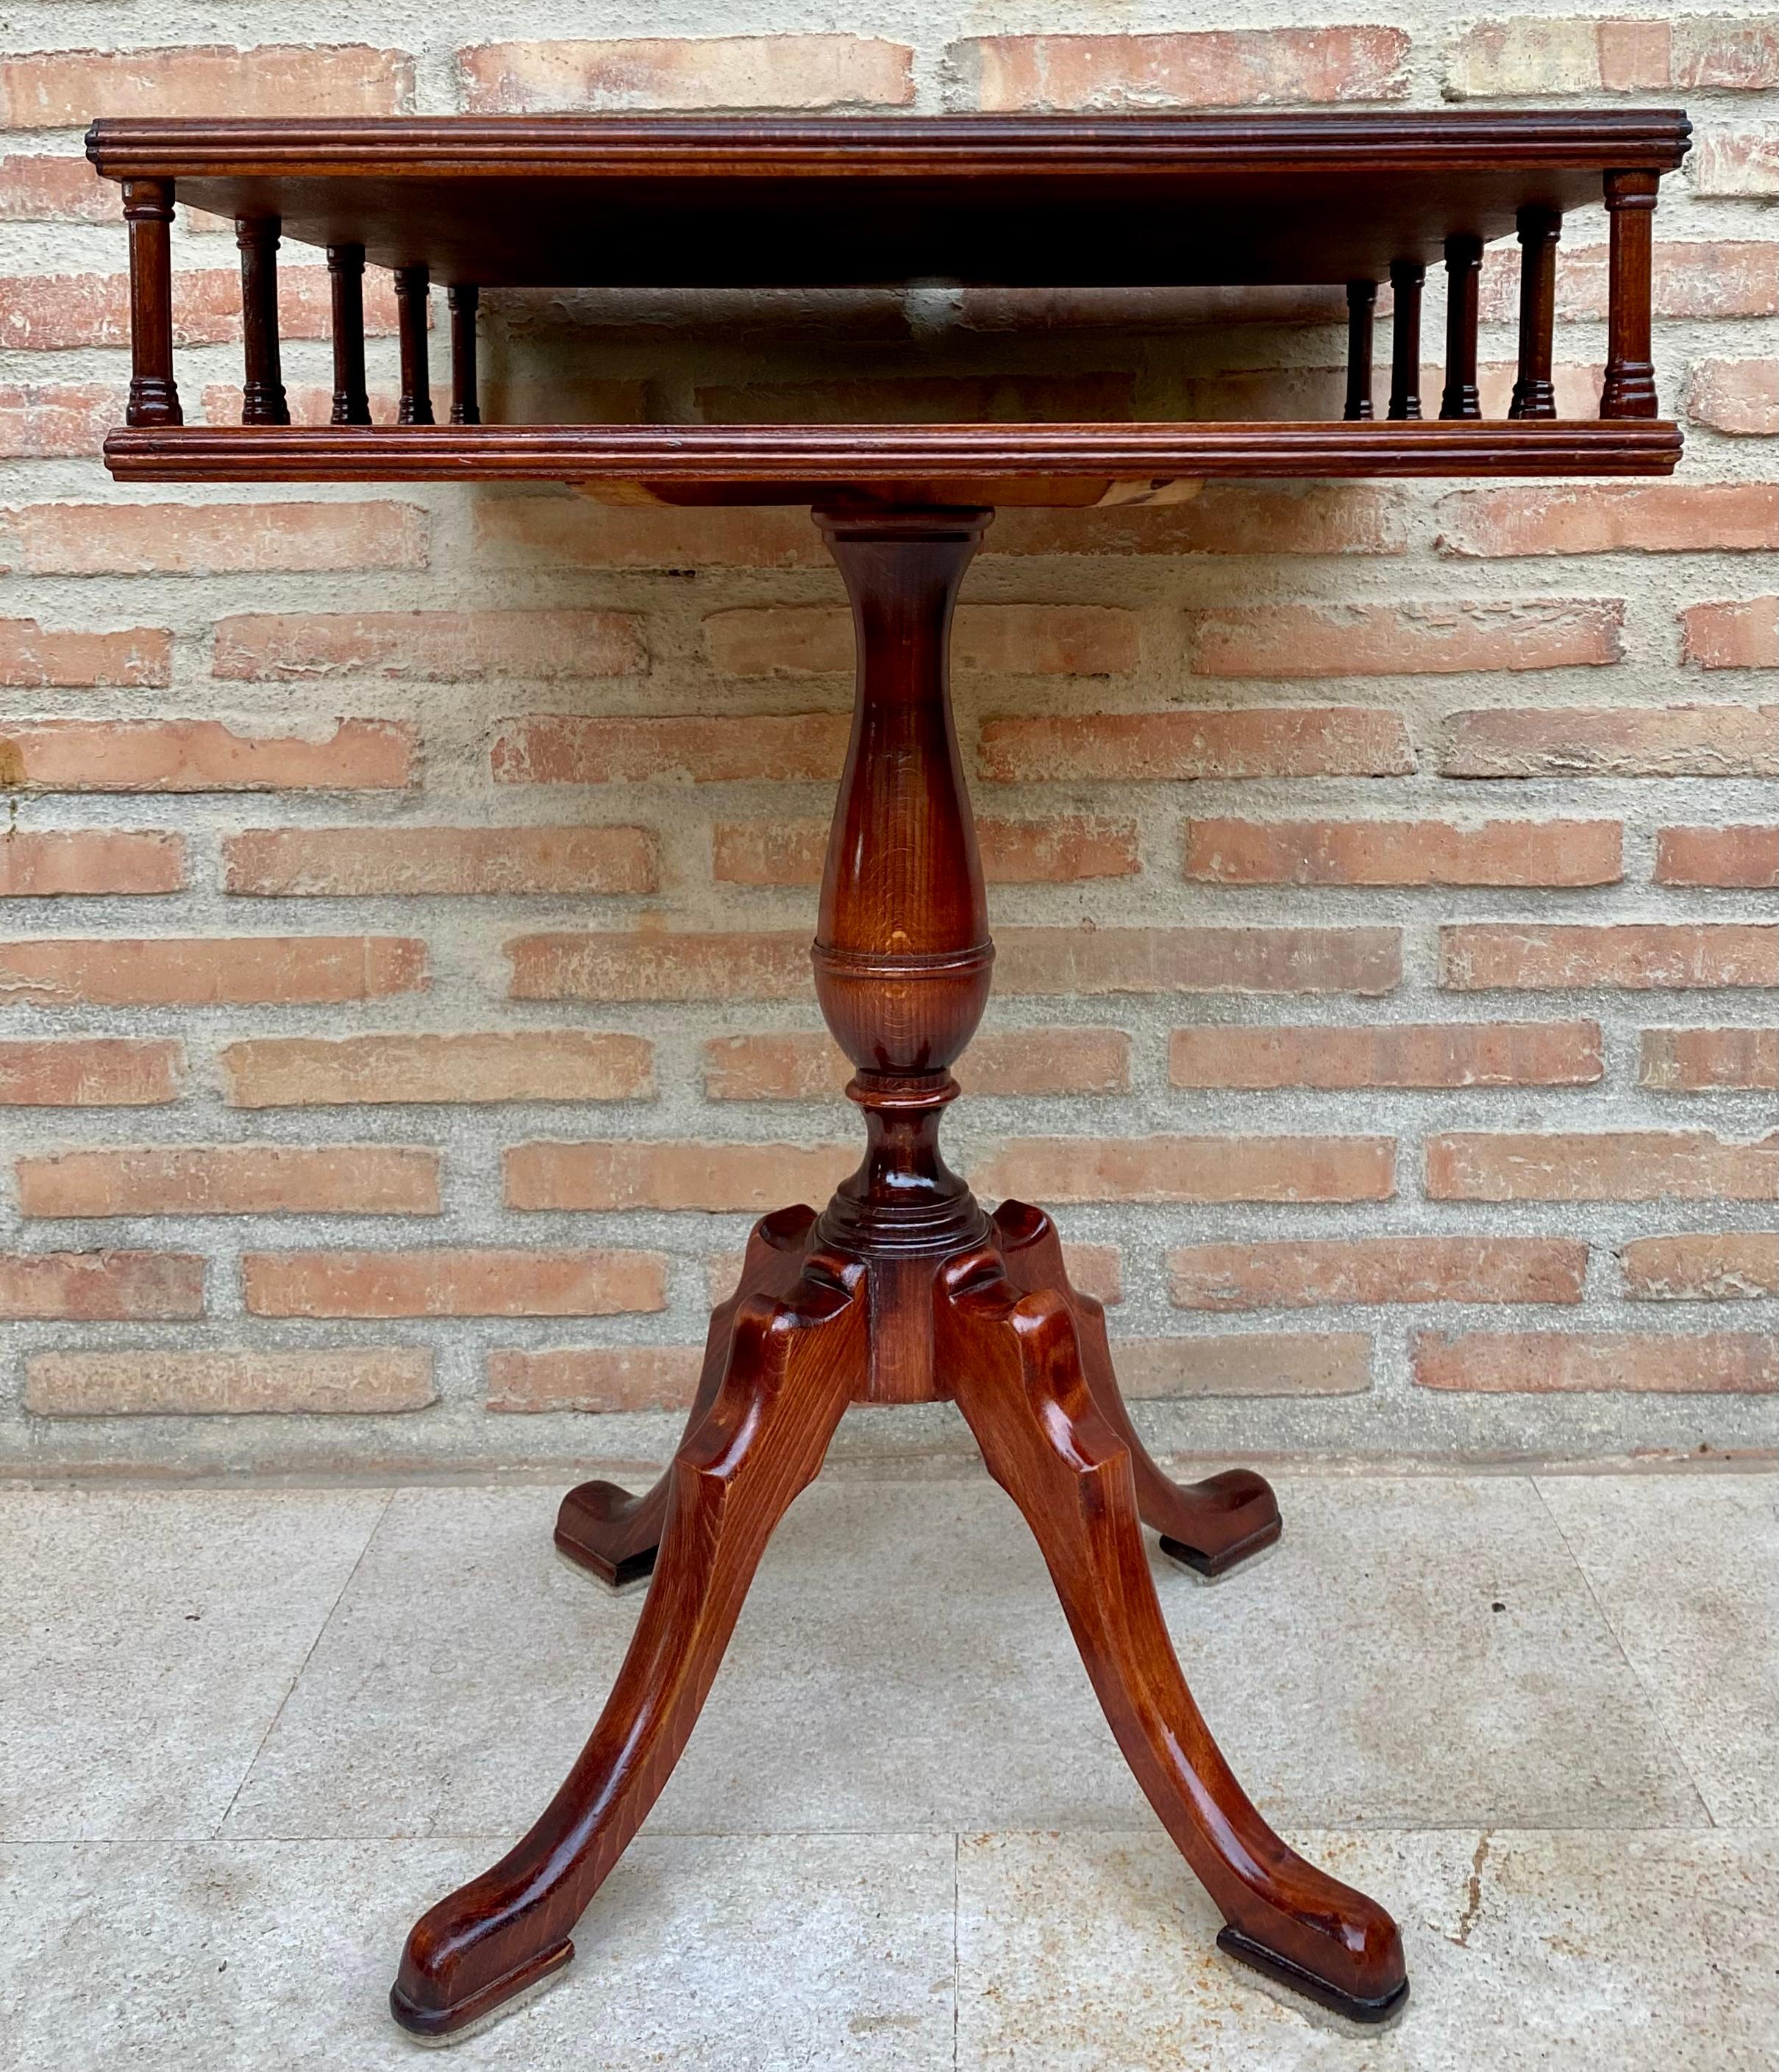 19th century Regency wooden side table with green leather upholstered top, having an open drawer or shelf, surrounded by small decorative columns and all resting on a carved fluted pillar extending on three downward-sloping legs ending in simple